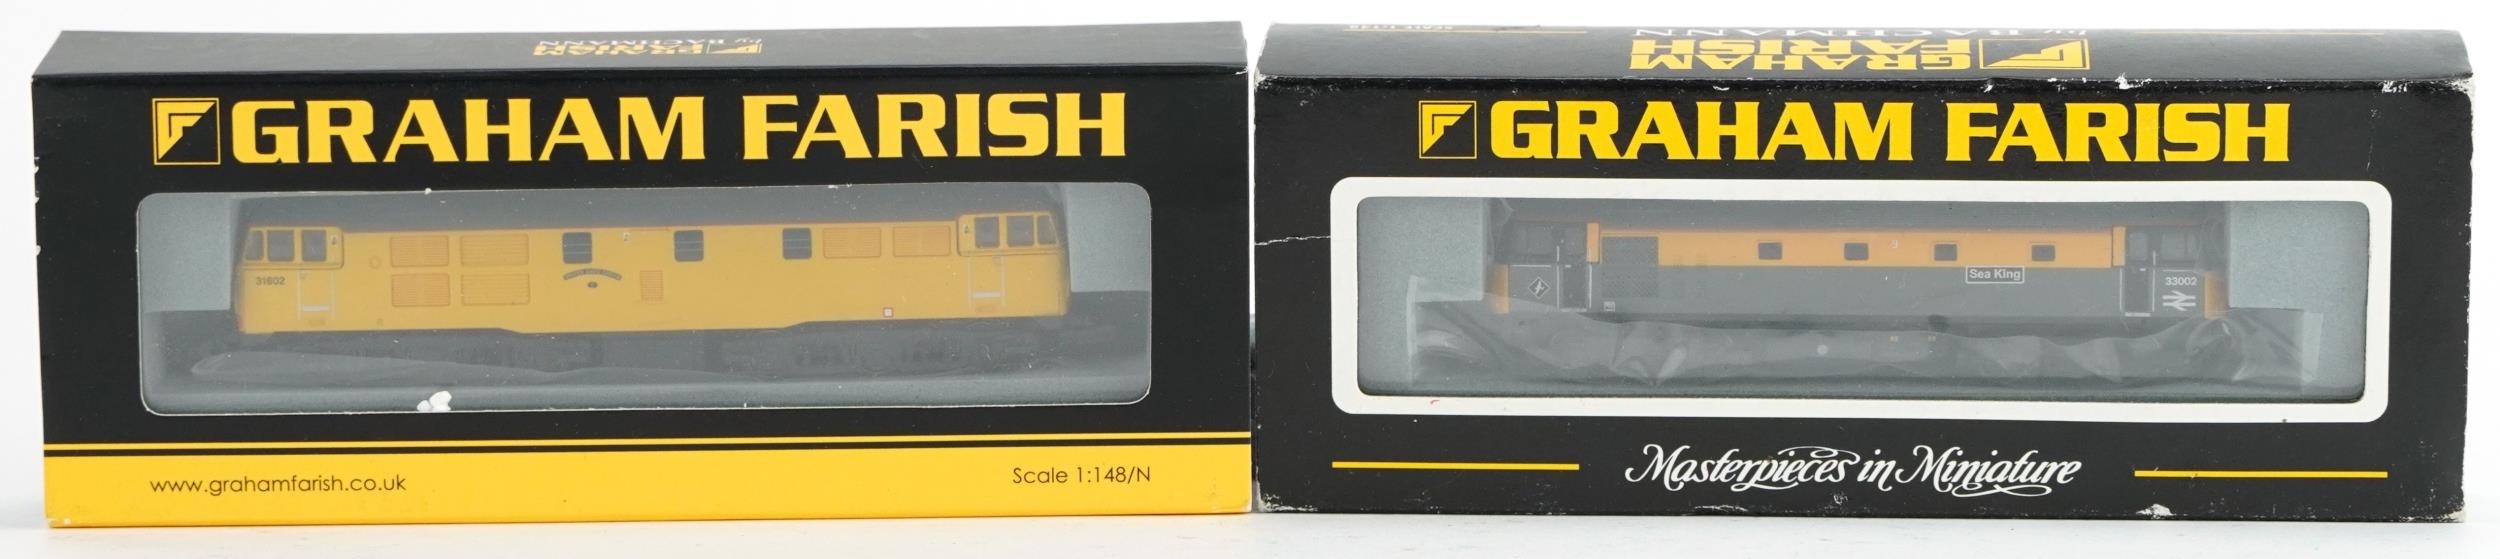 Two Graham Farish N gauge model railway locomotives with cases, numbers 371-105 and 371-130